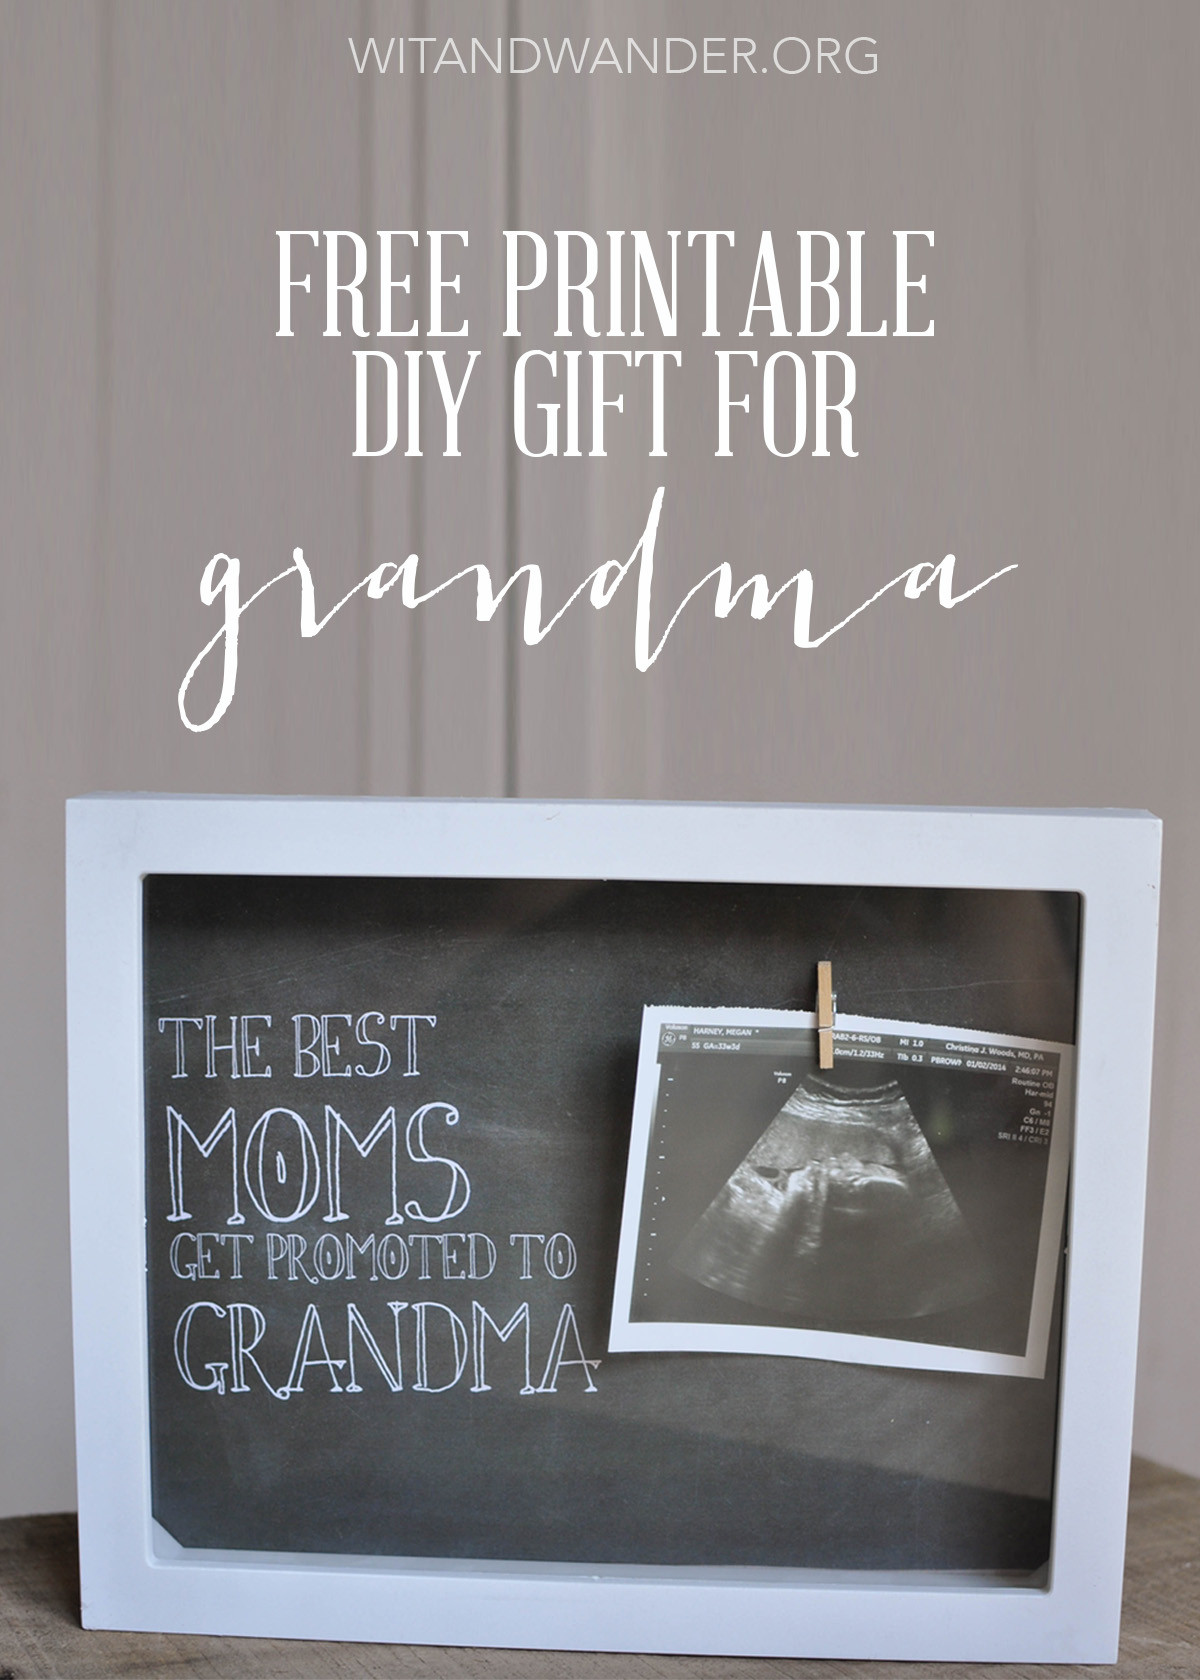 Gift Ideas For Grandma From Baby
 Homemade Shadow Box Gift for Grandma Wit & Wander